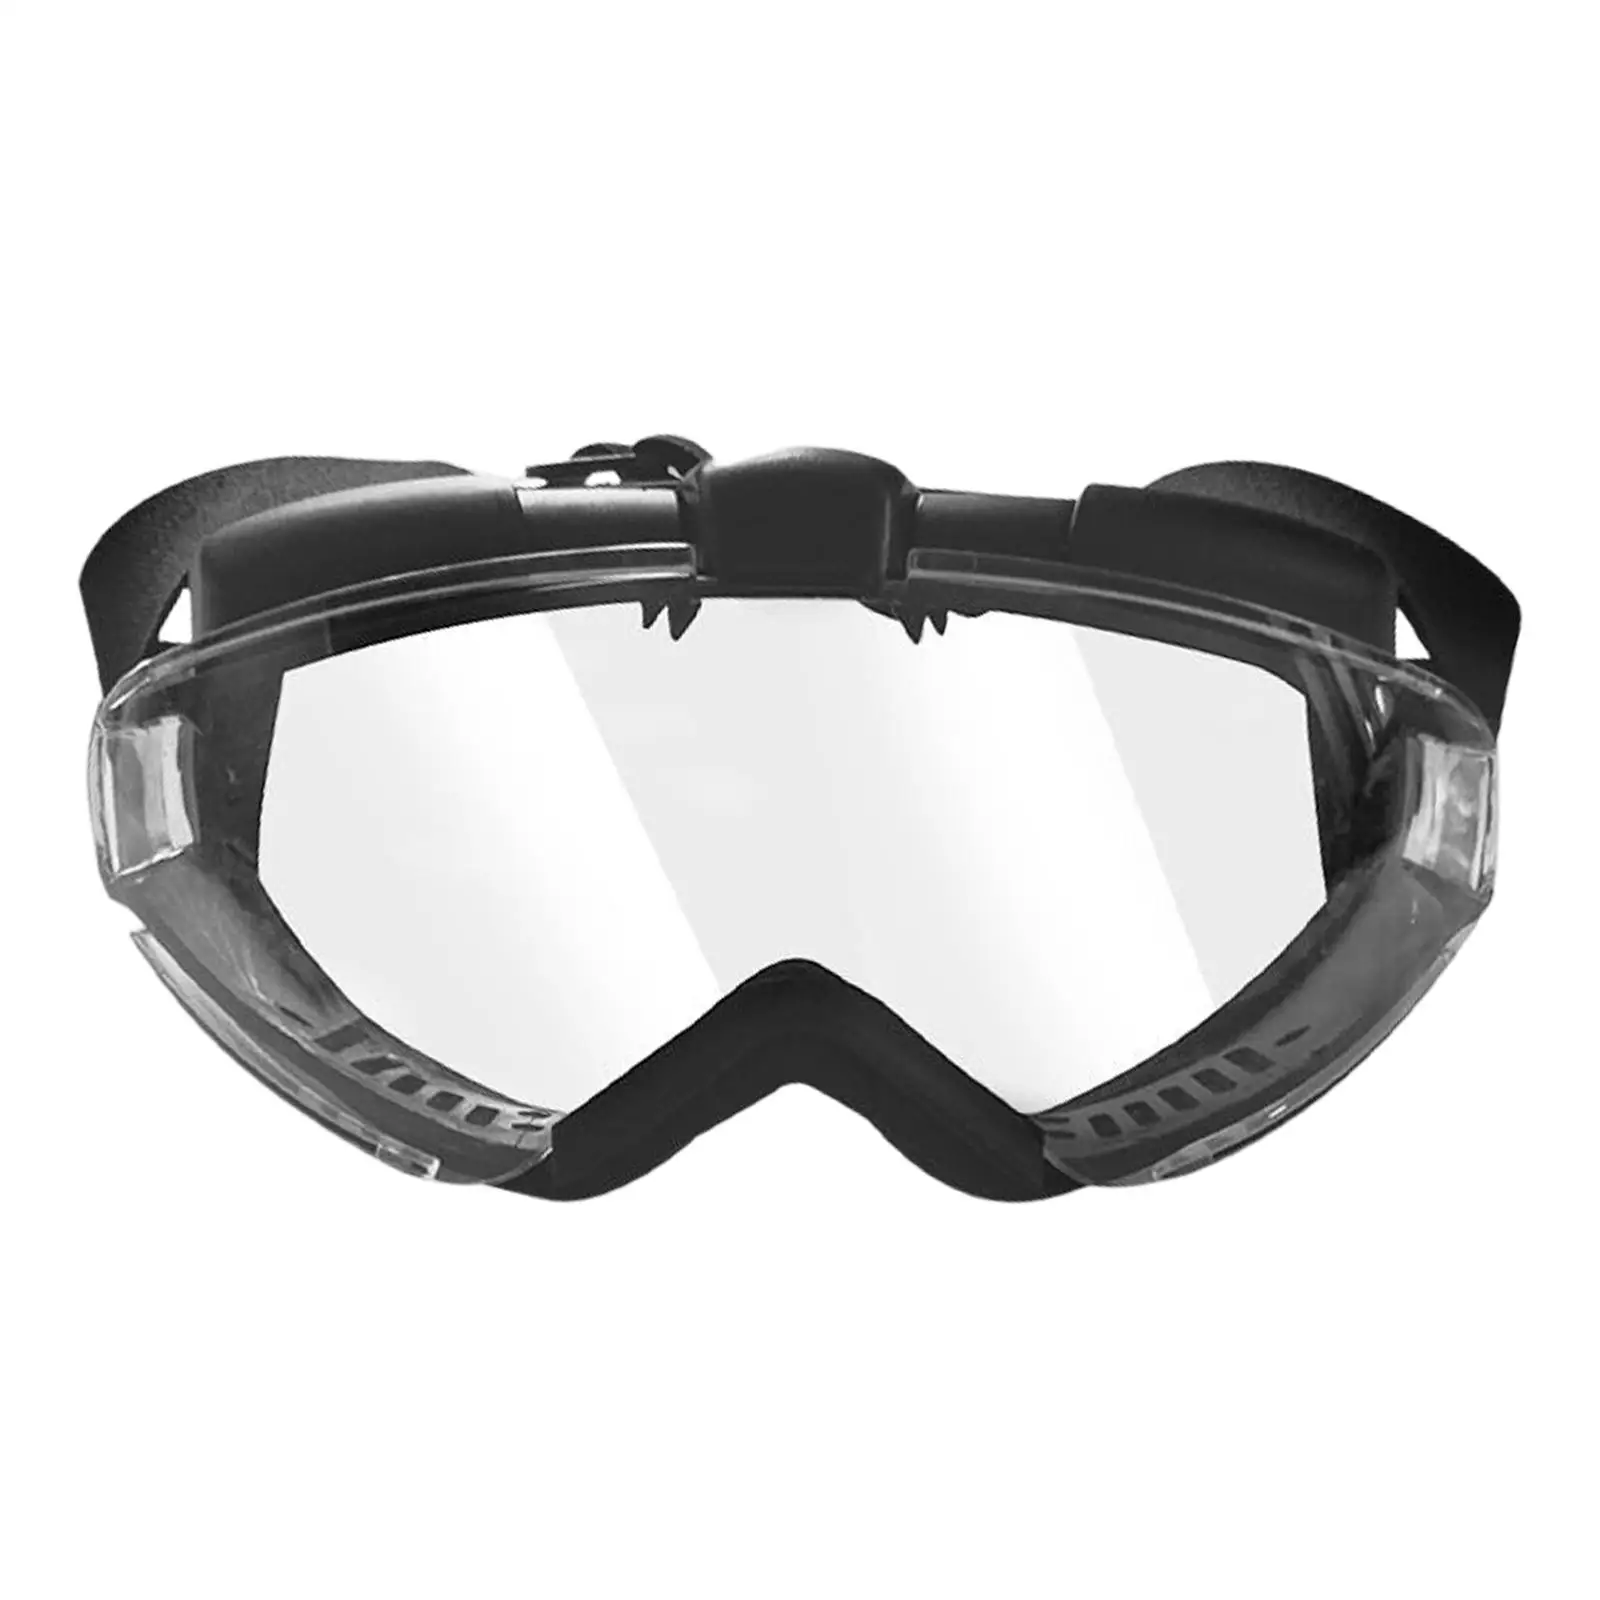 Outdoor Glasses Adjustable Strap for Skating Sports Motorcycle Snowmobiles Running